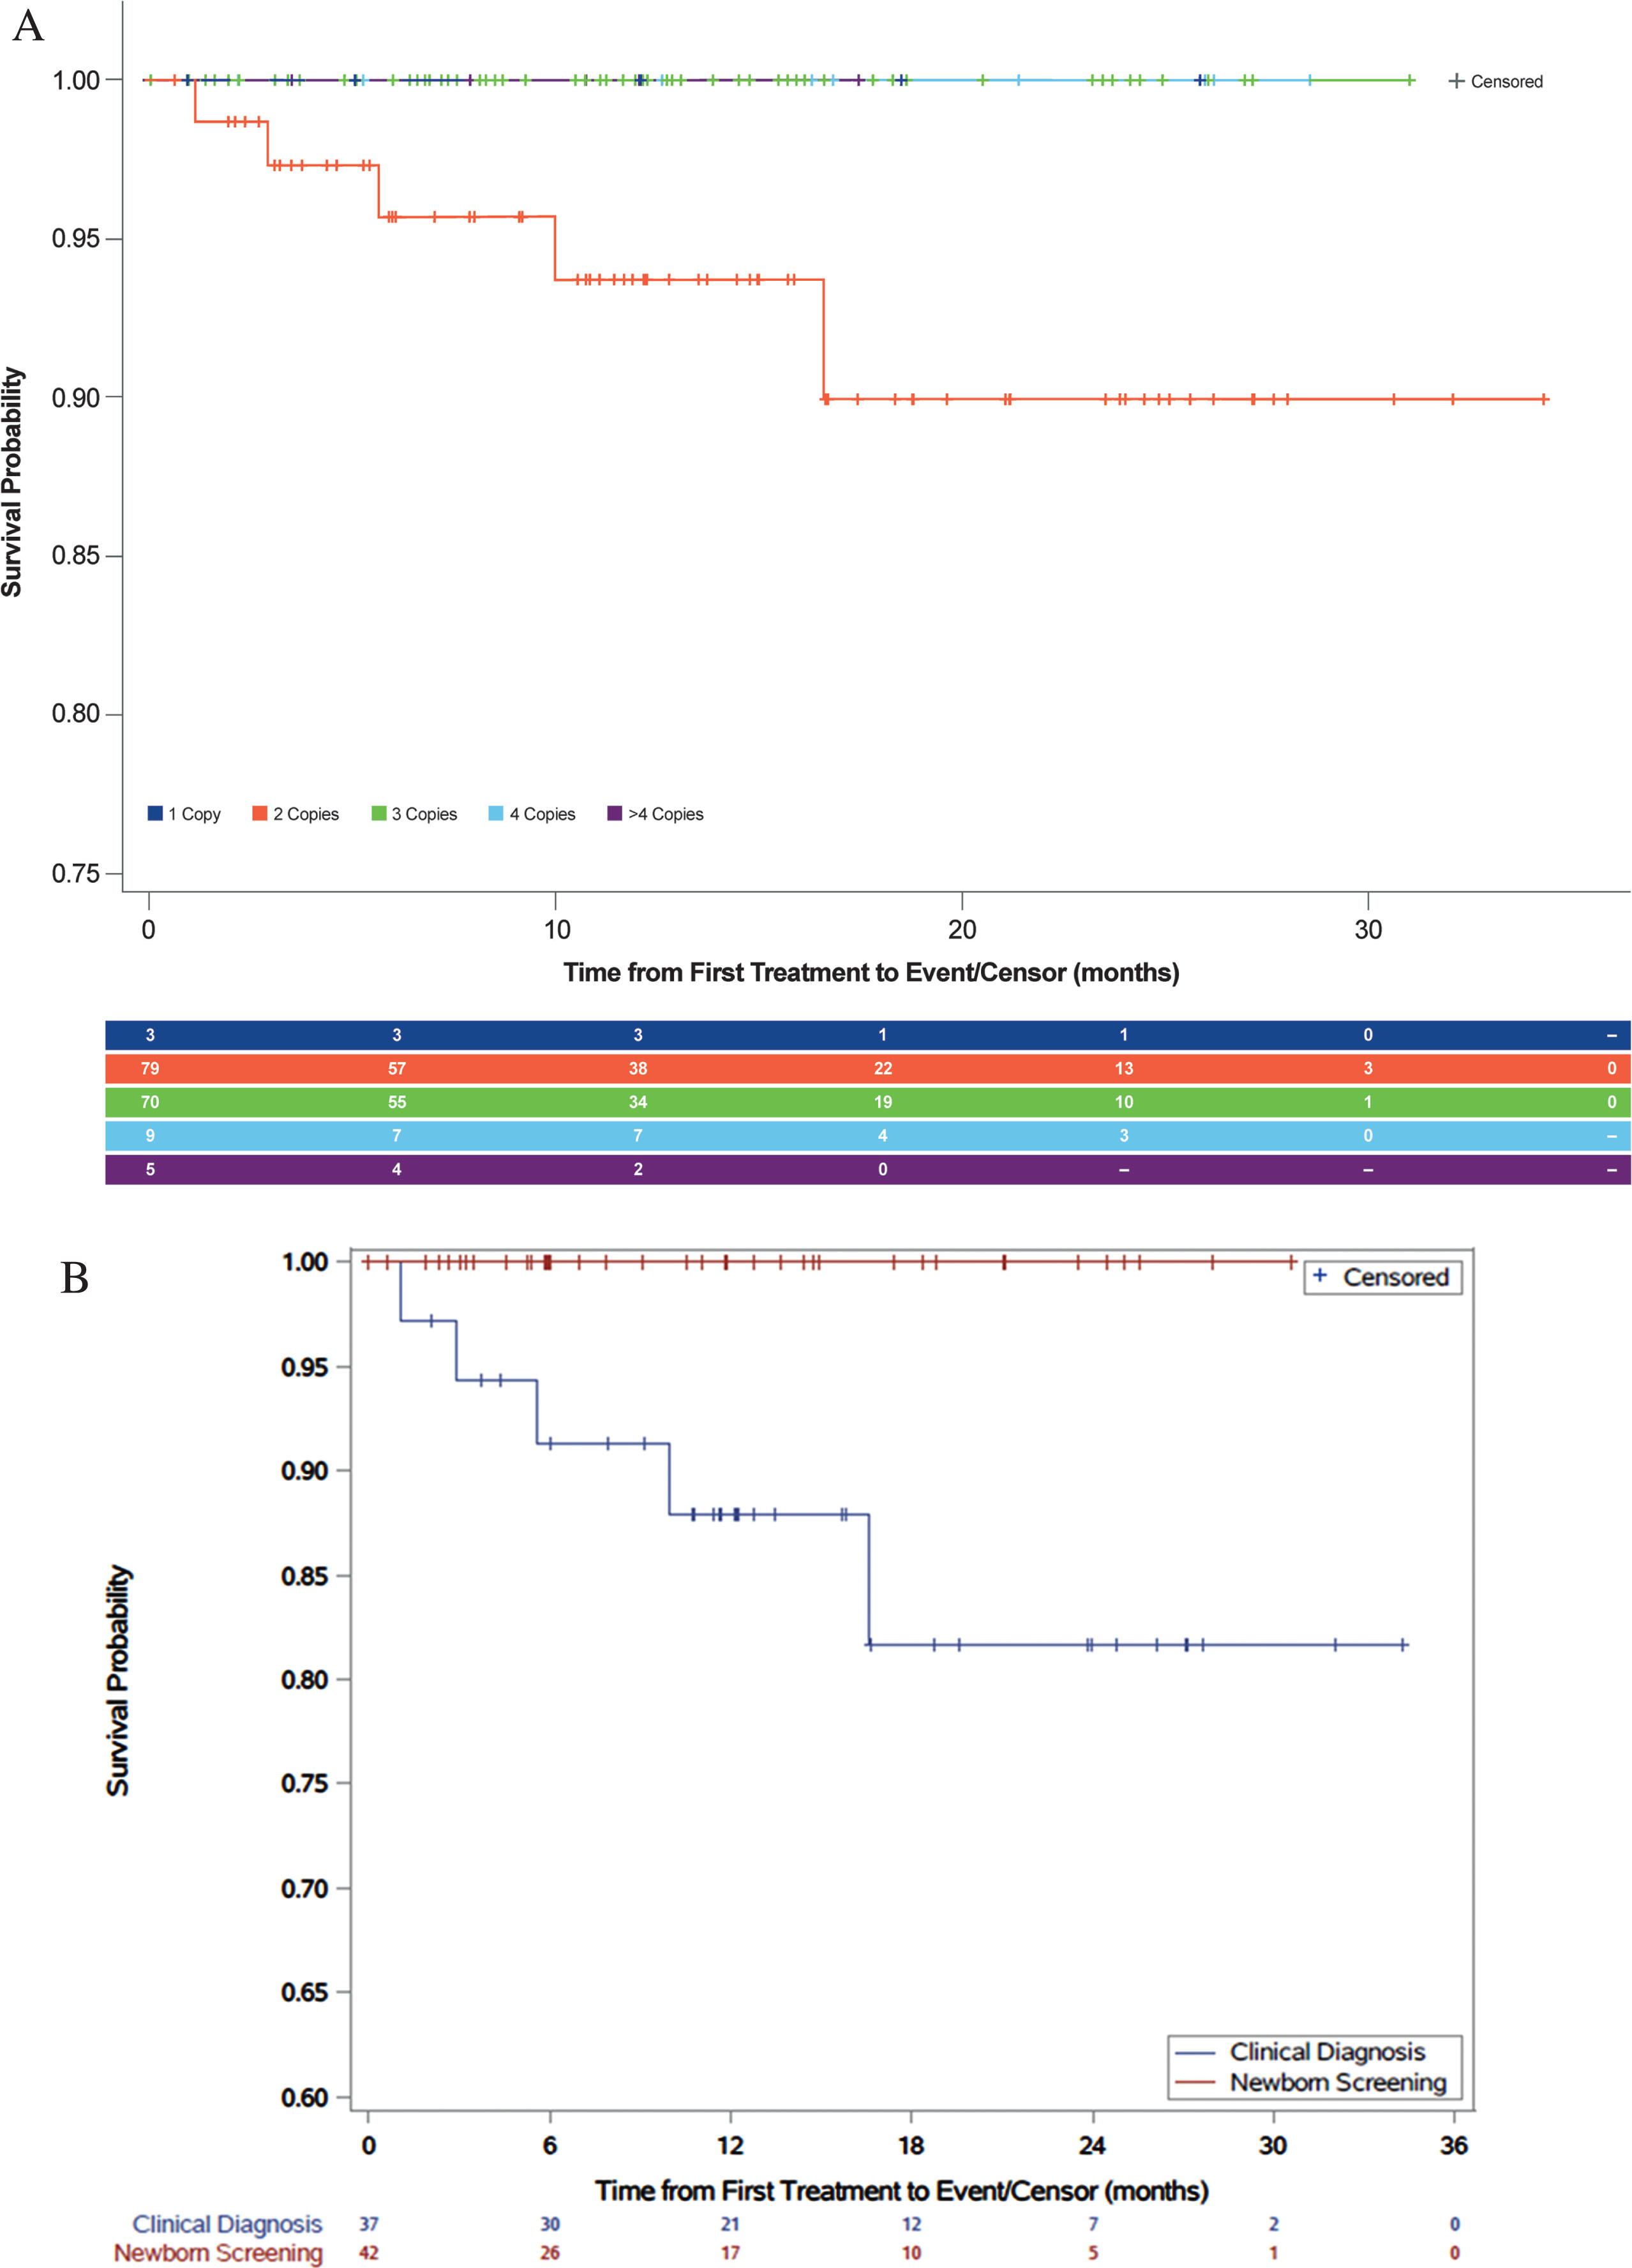 Event-free survival: patients treated with onasemnogene abeparvovec (A) by SMN2 copy number and (B) patients with two copies of SMN2 gene identified by newborn screening or clinical diagnosis.